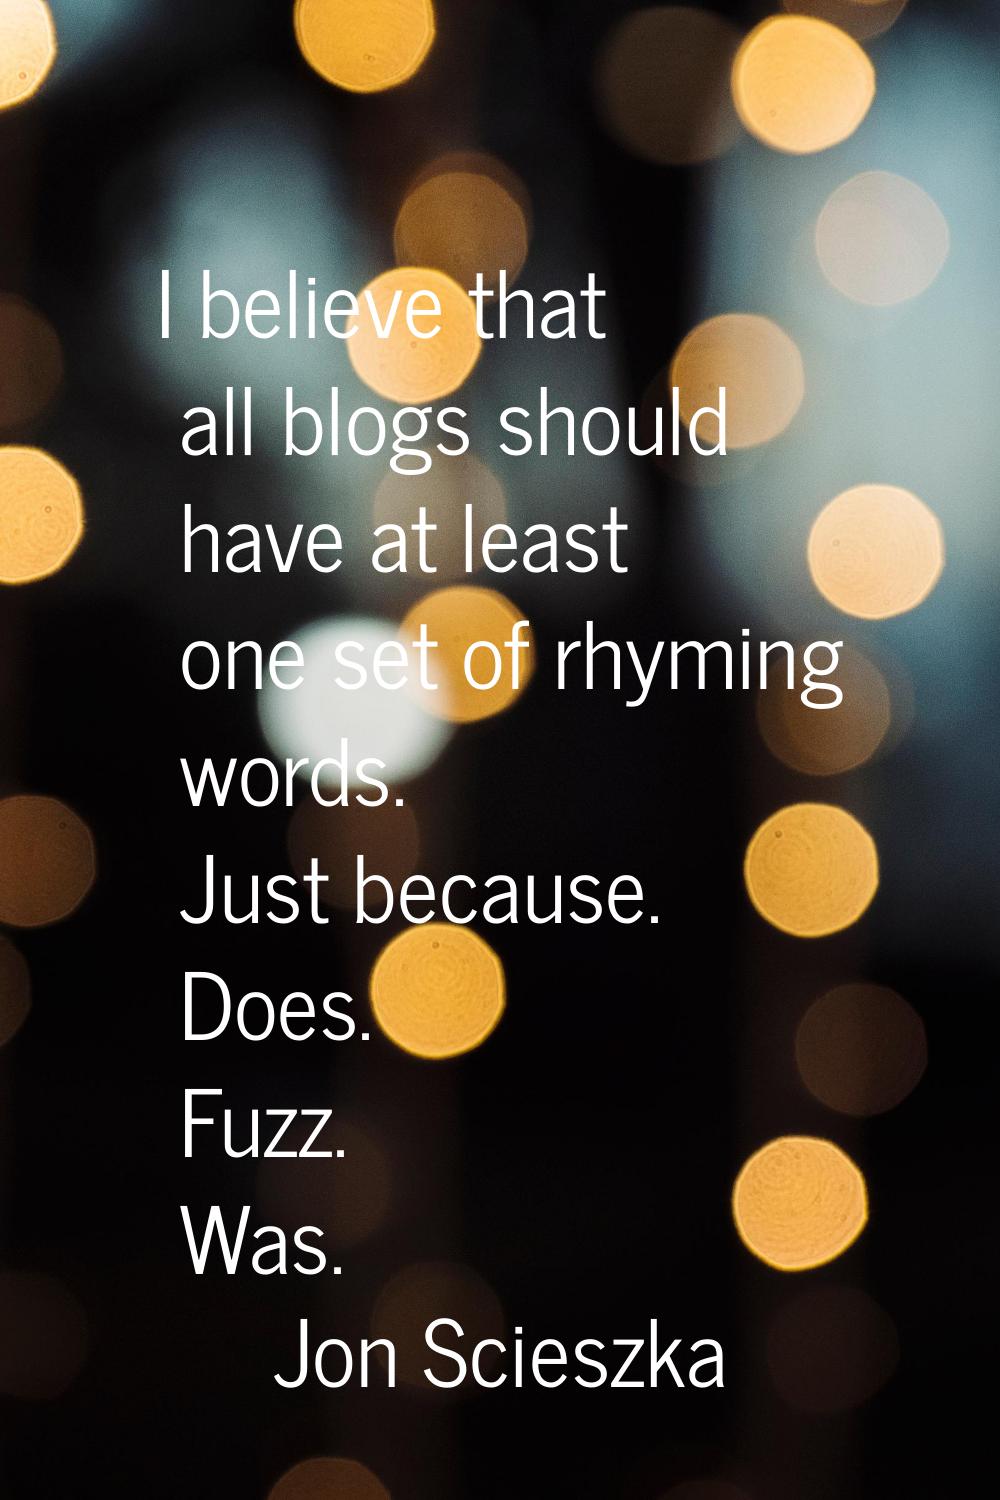 I believe that all blogs should have at least one set of rhyming words. Just because. Does. Fuzz. W